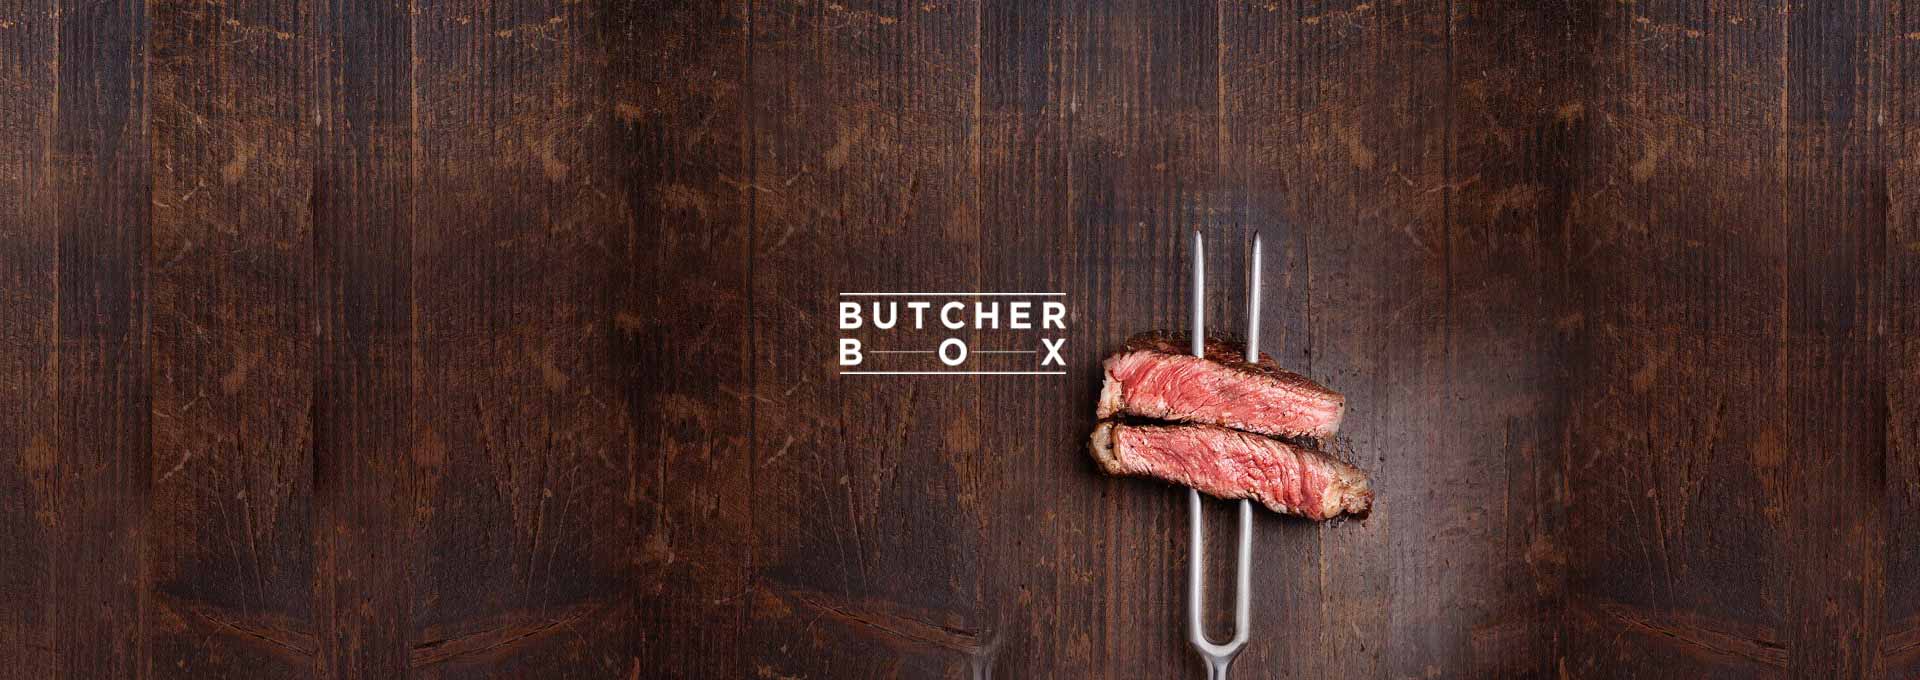 Butcher Box Review: Monthly Meat Subscription